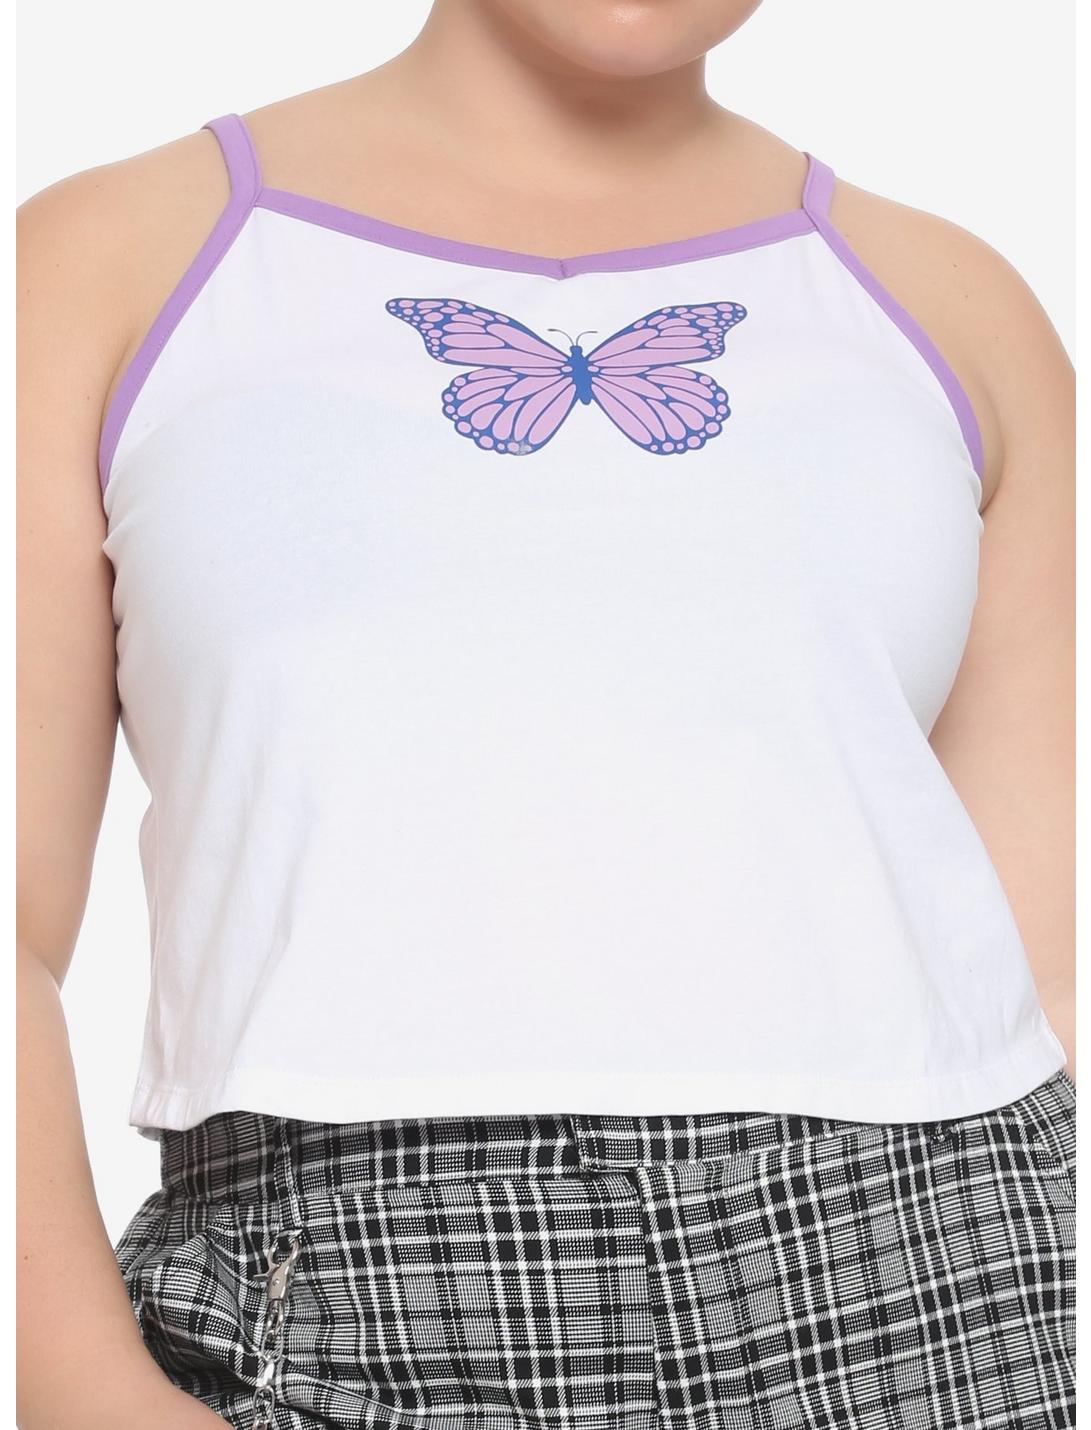 Purple Butterfly Girls Strappy Crop Tank Top Plus Size, WHITE, hi-res